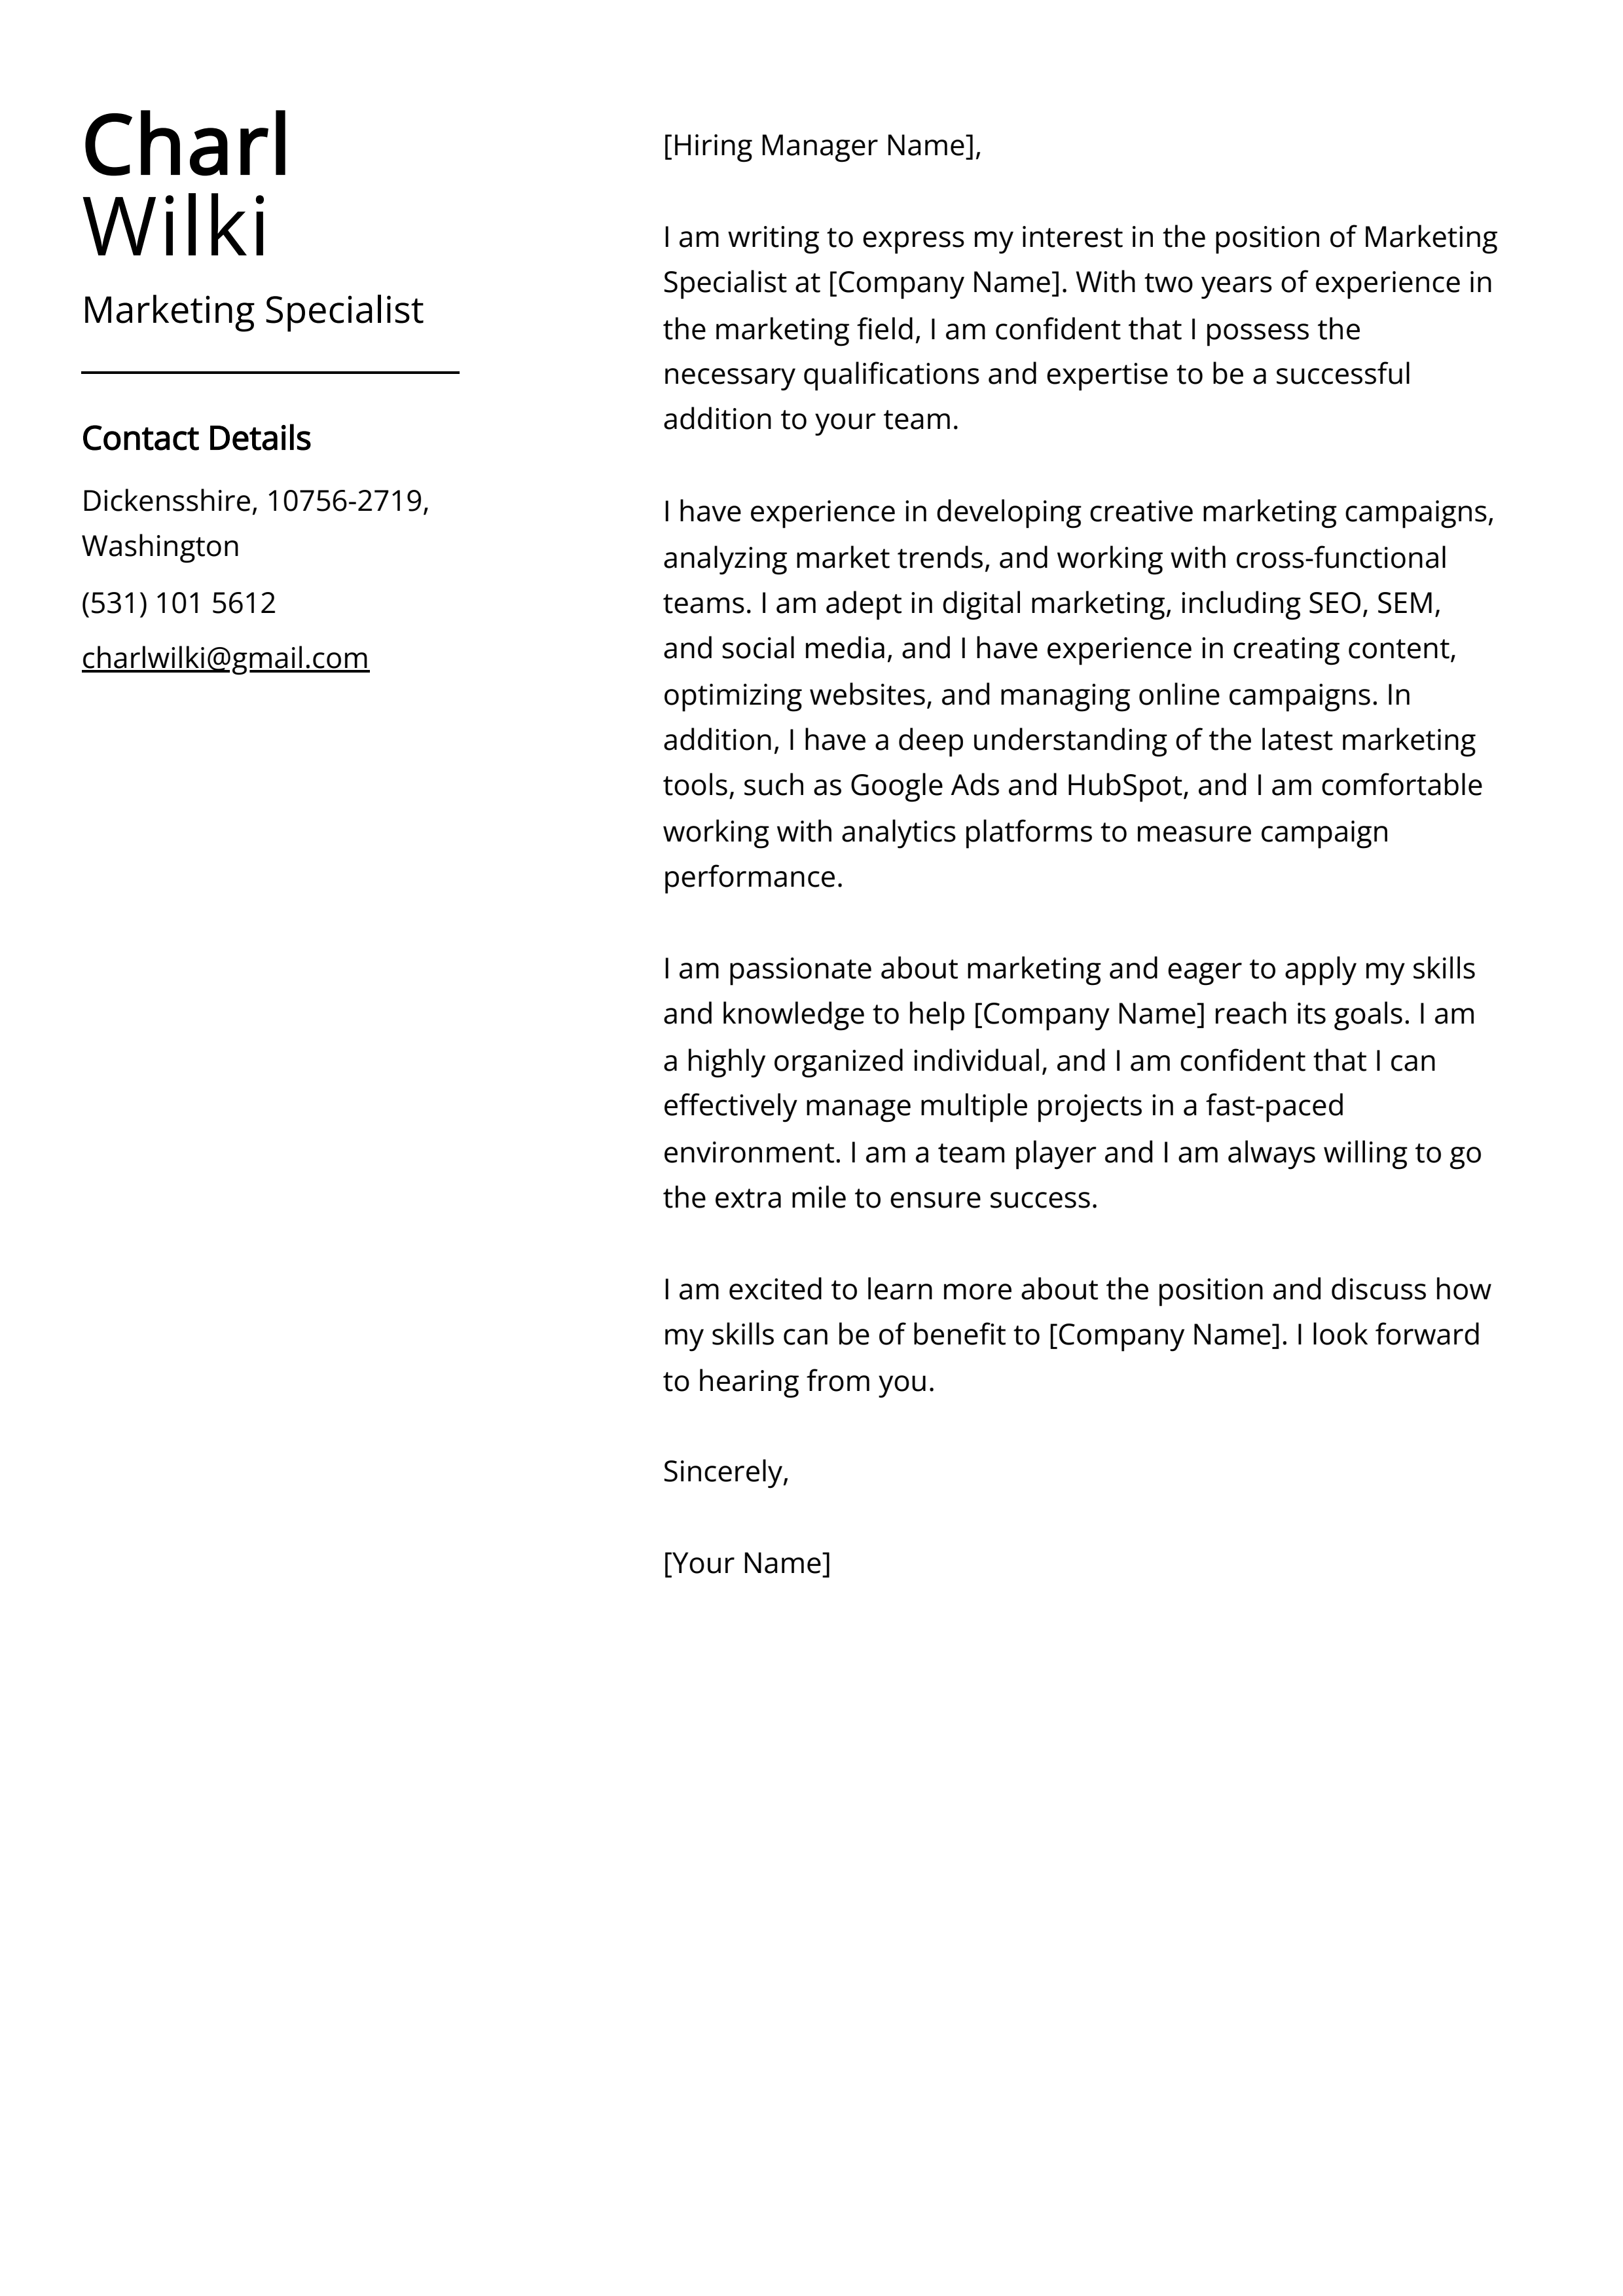 Marketing Specialist Cover Letter Example